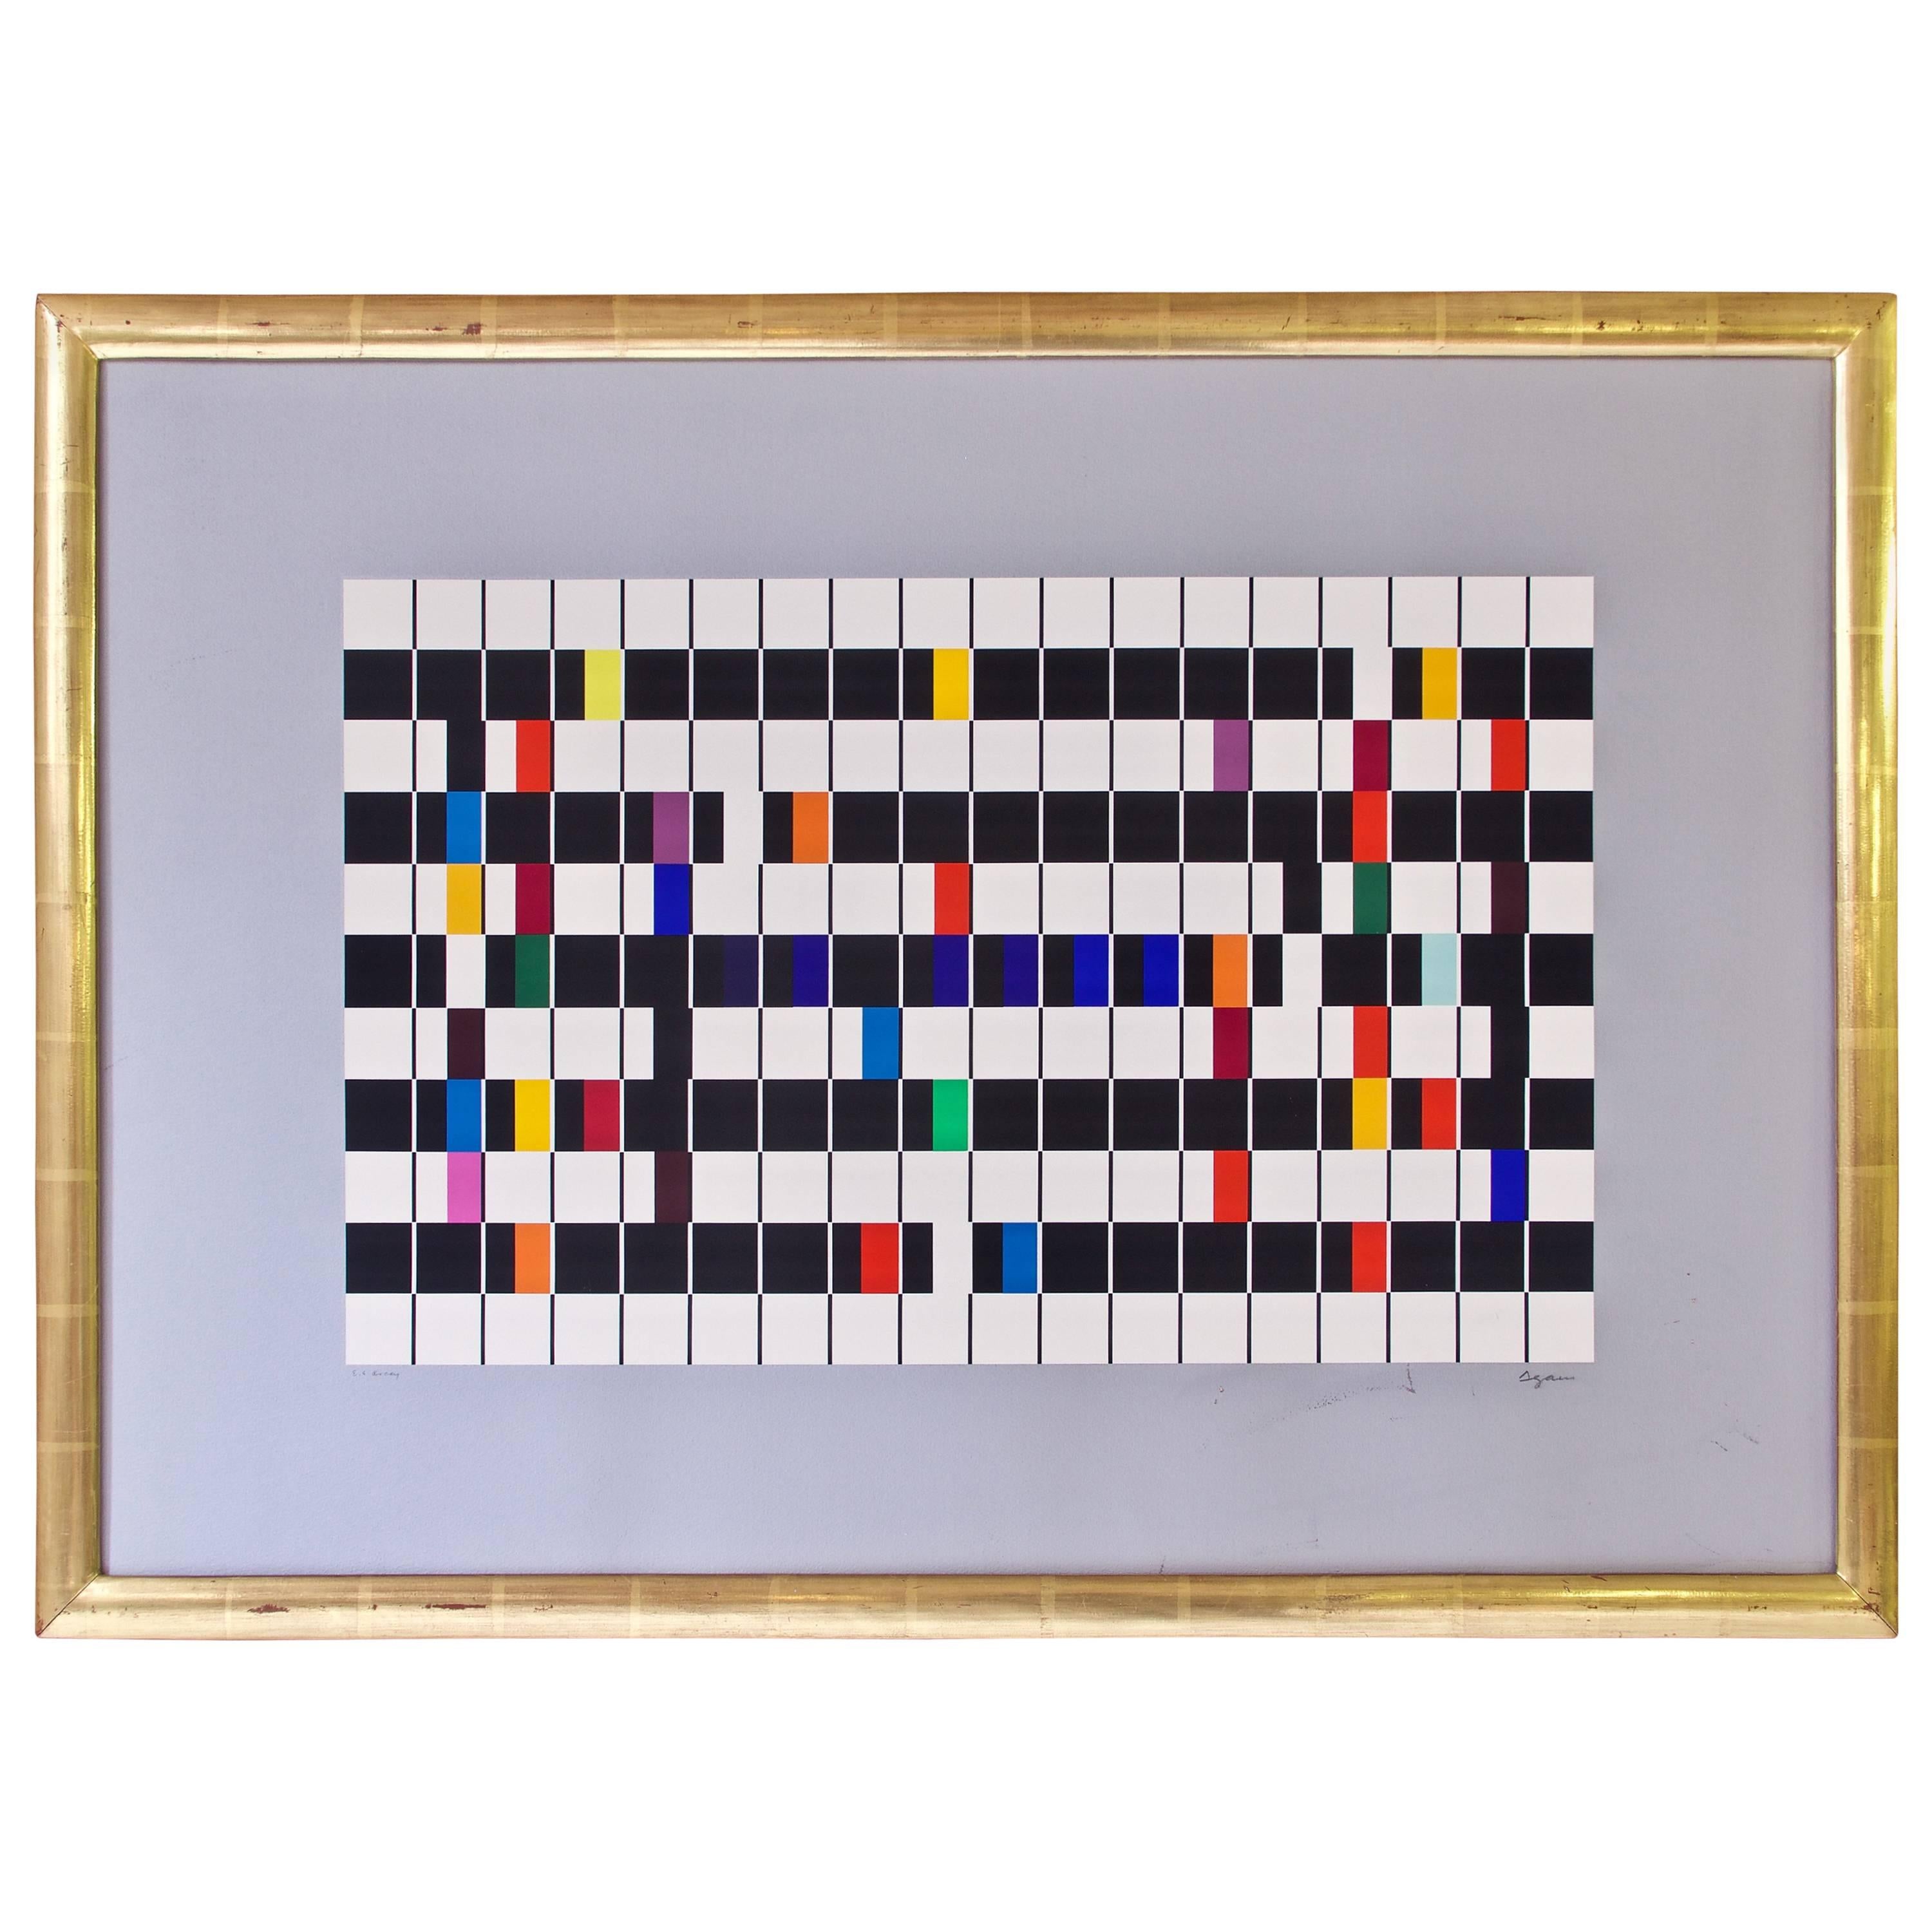 'One and Another' Artist's Proof Signed Color Serigraph by Yaacov Agam, 1980s